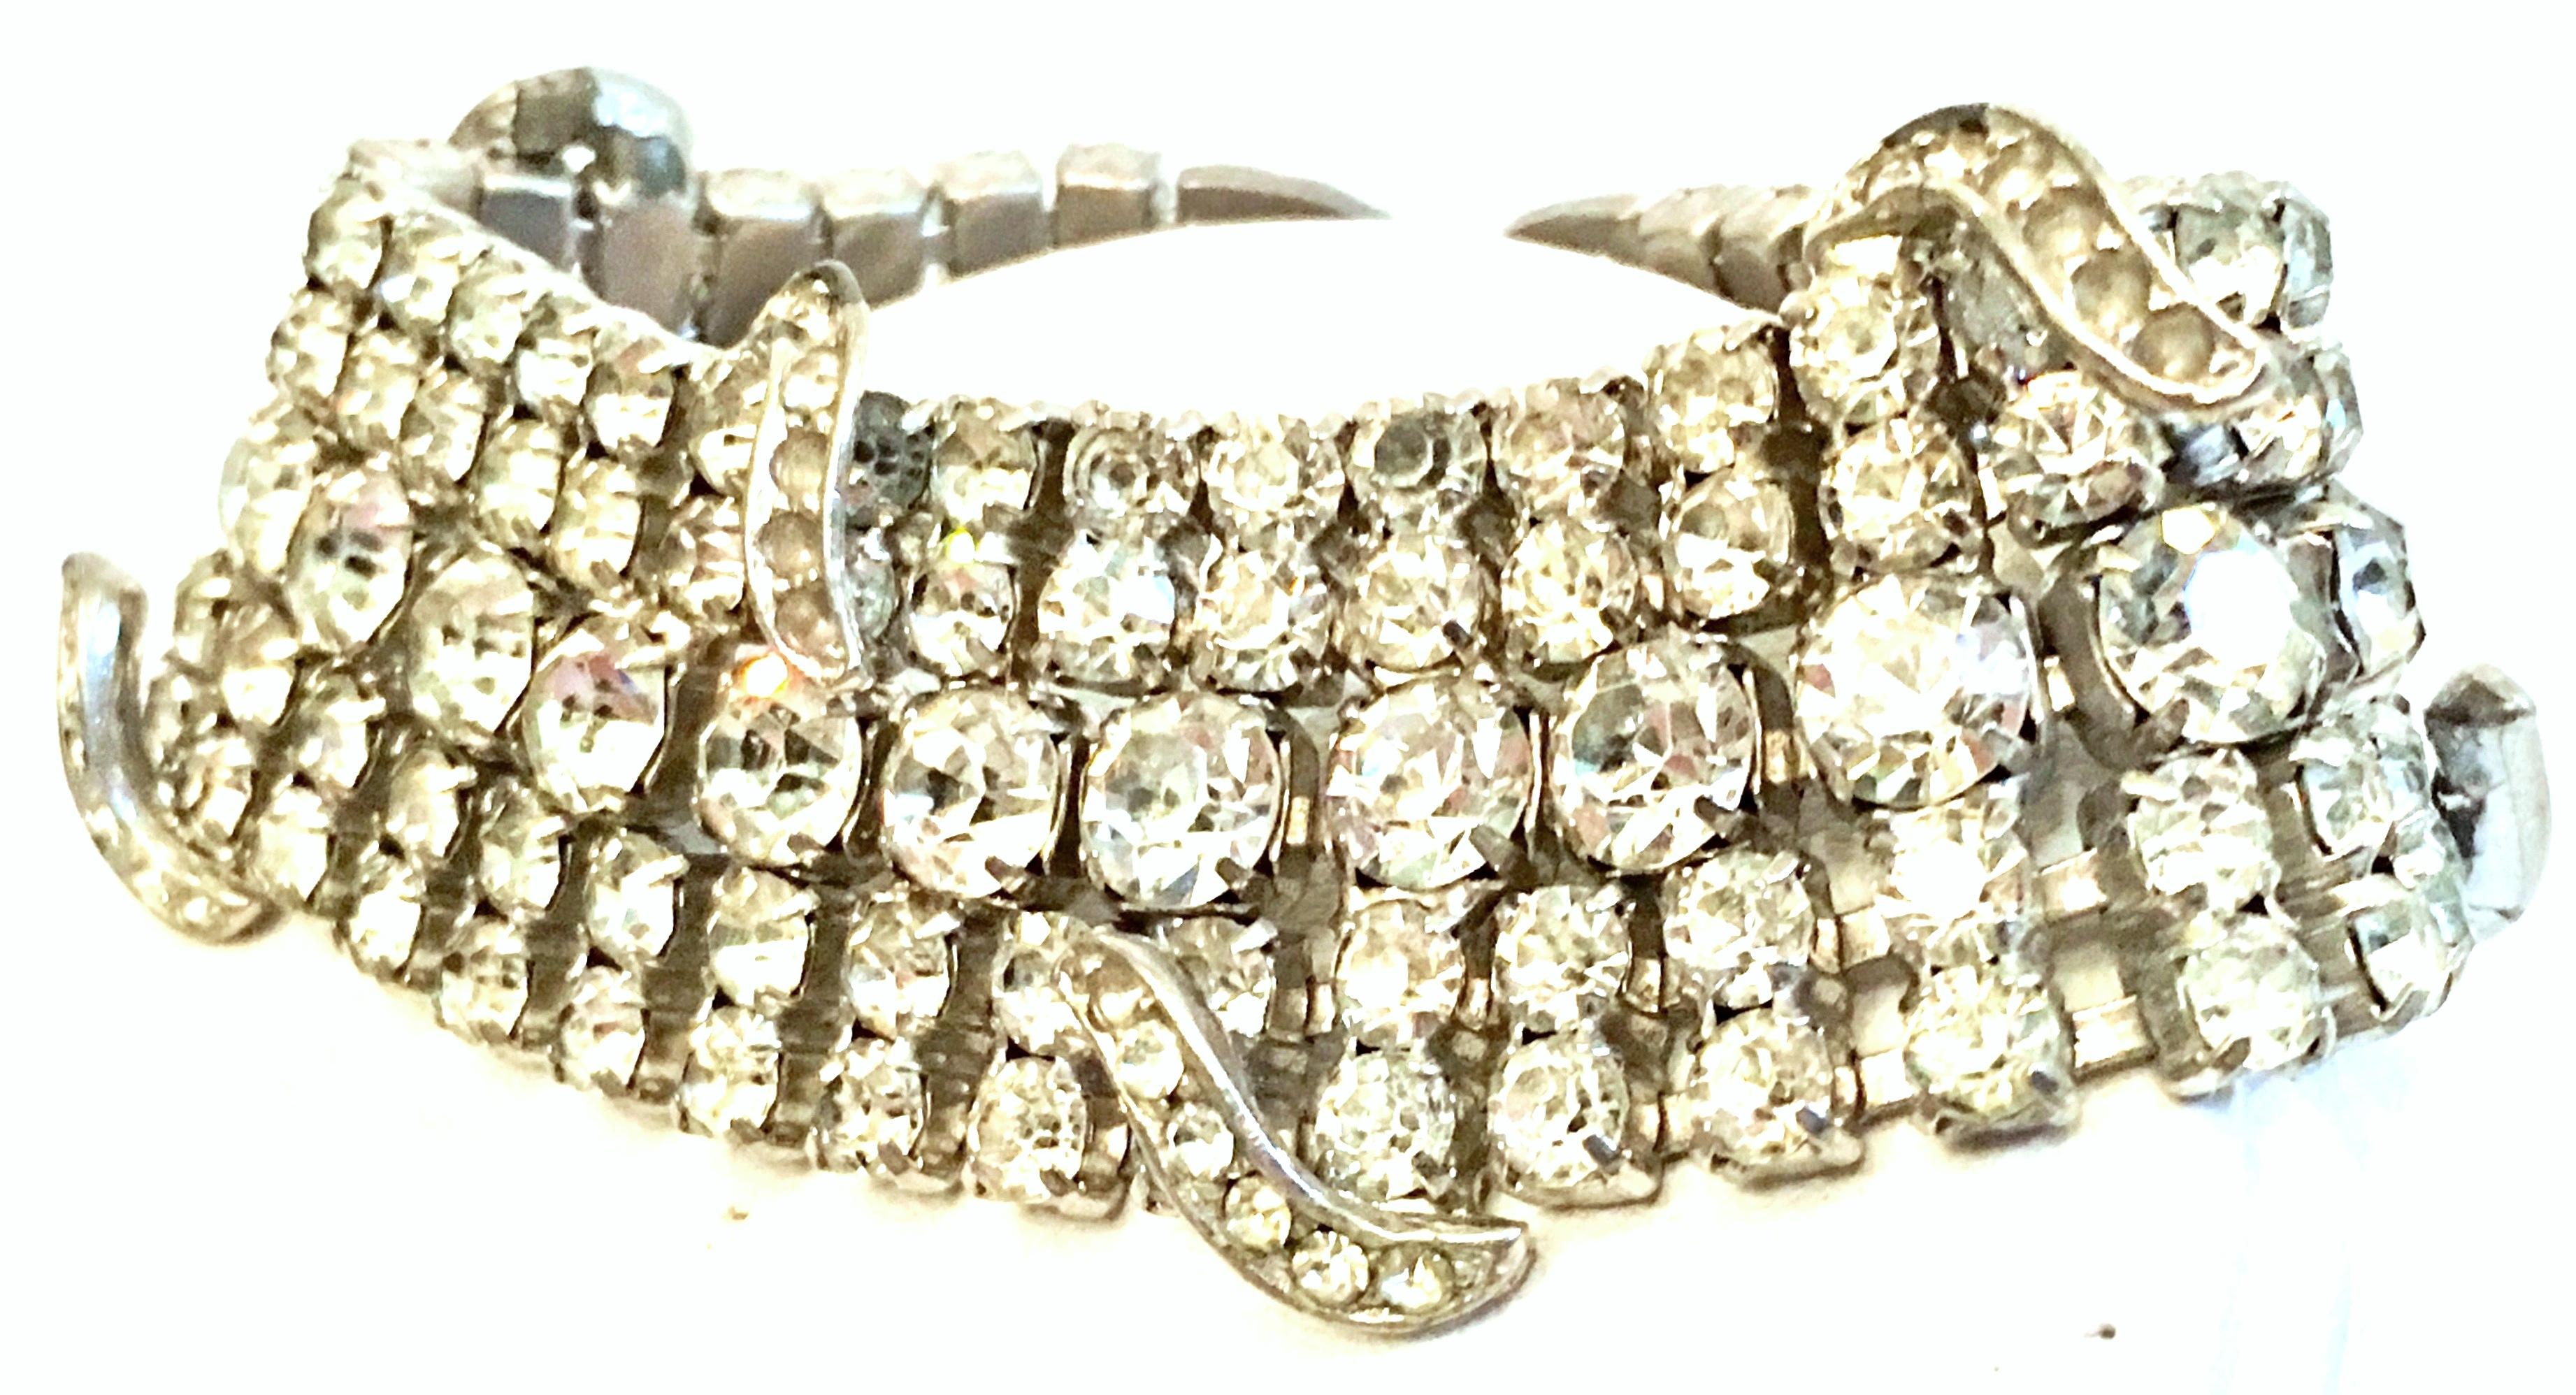 Mid-20th Century Silver & Austrian crystal Art Deco Bracelet. This substantial silver plate prong set bracelet features curved and raised over mount detail with brilliant cut and faceted colorless prong set stones. The clasp is fold over box style